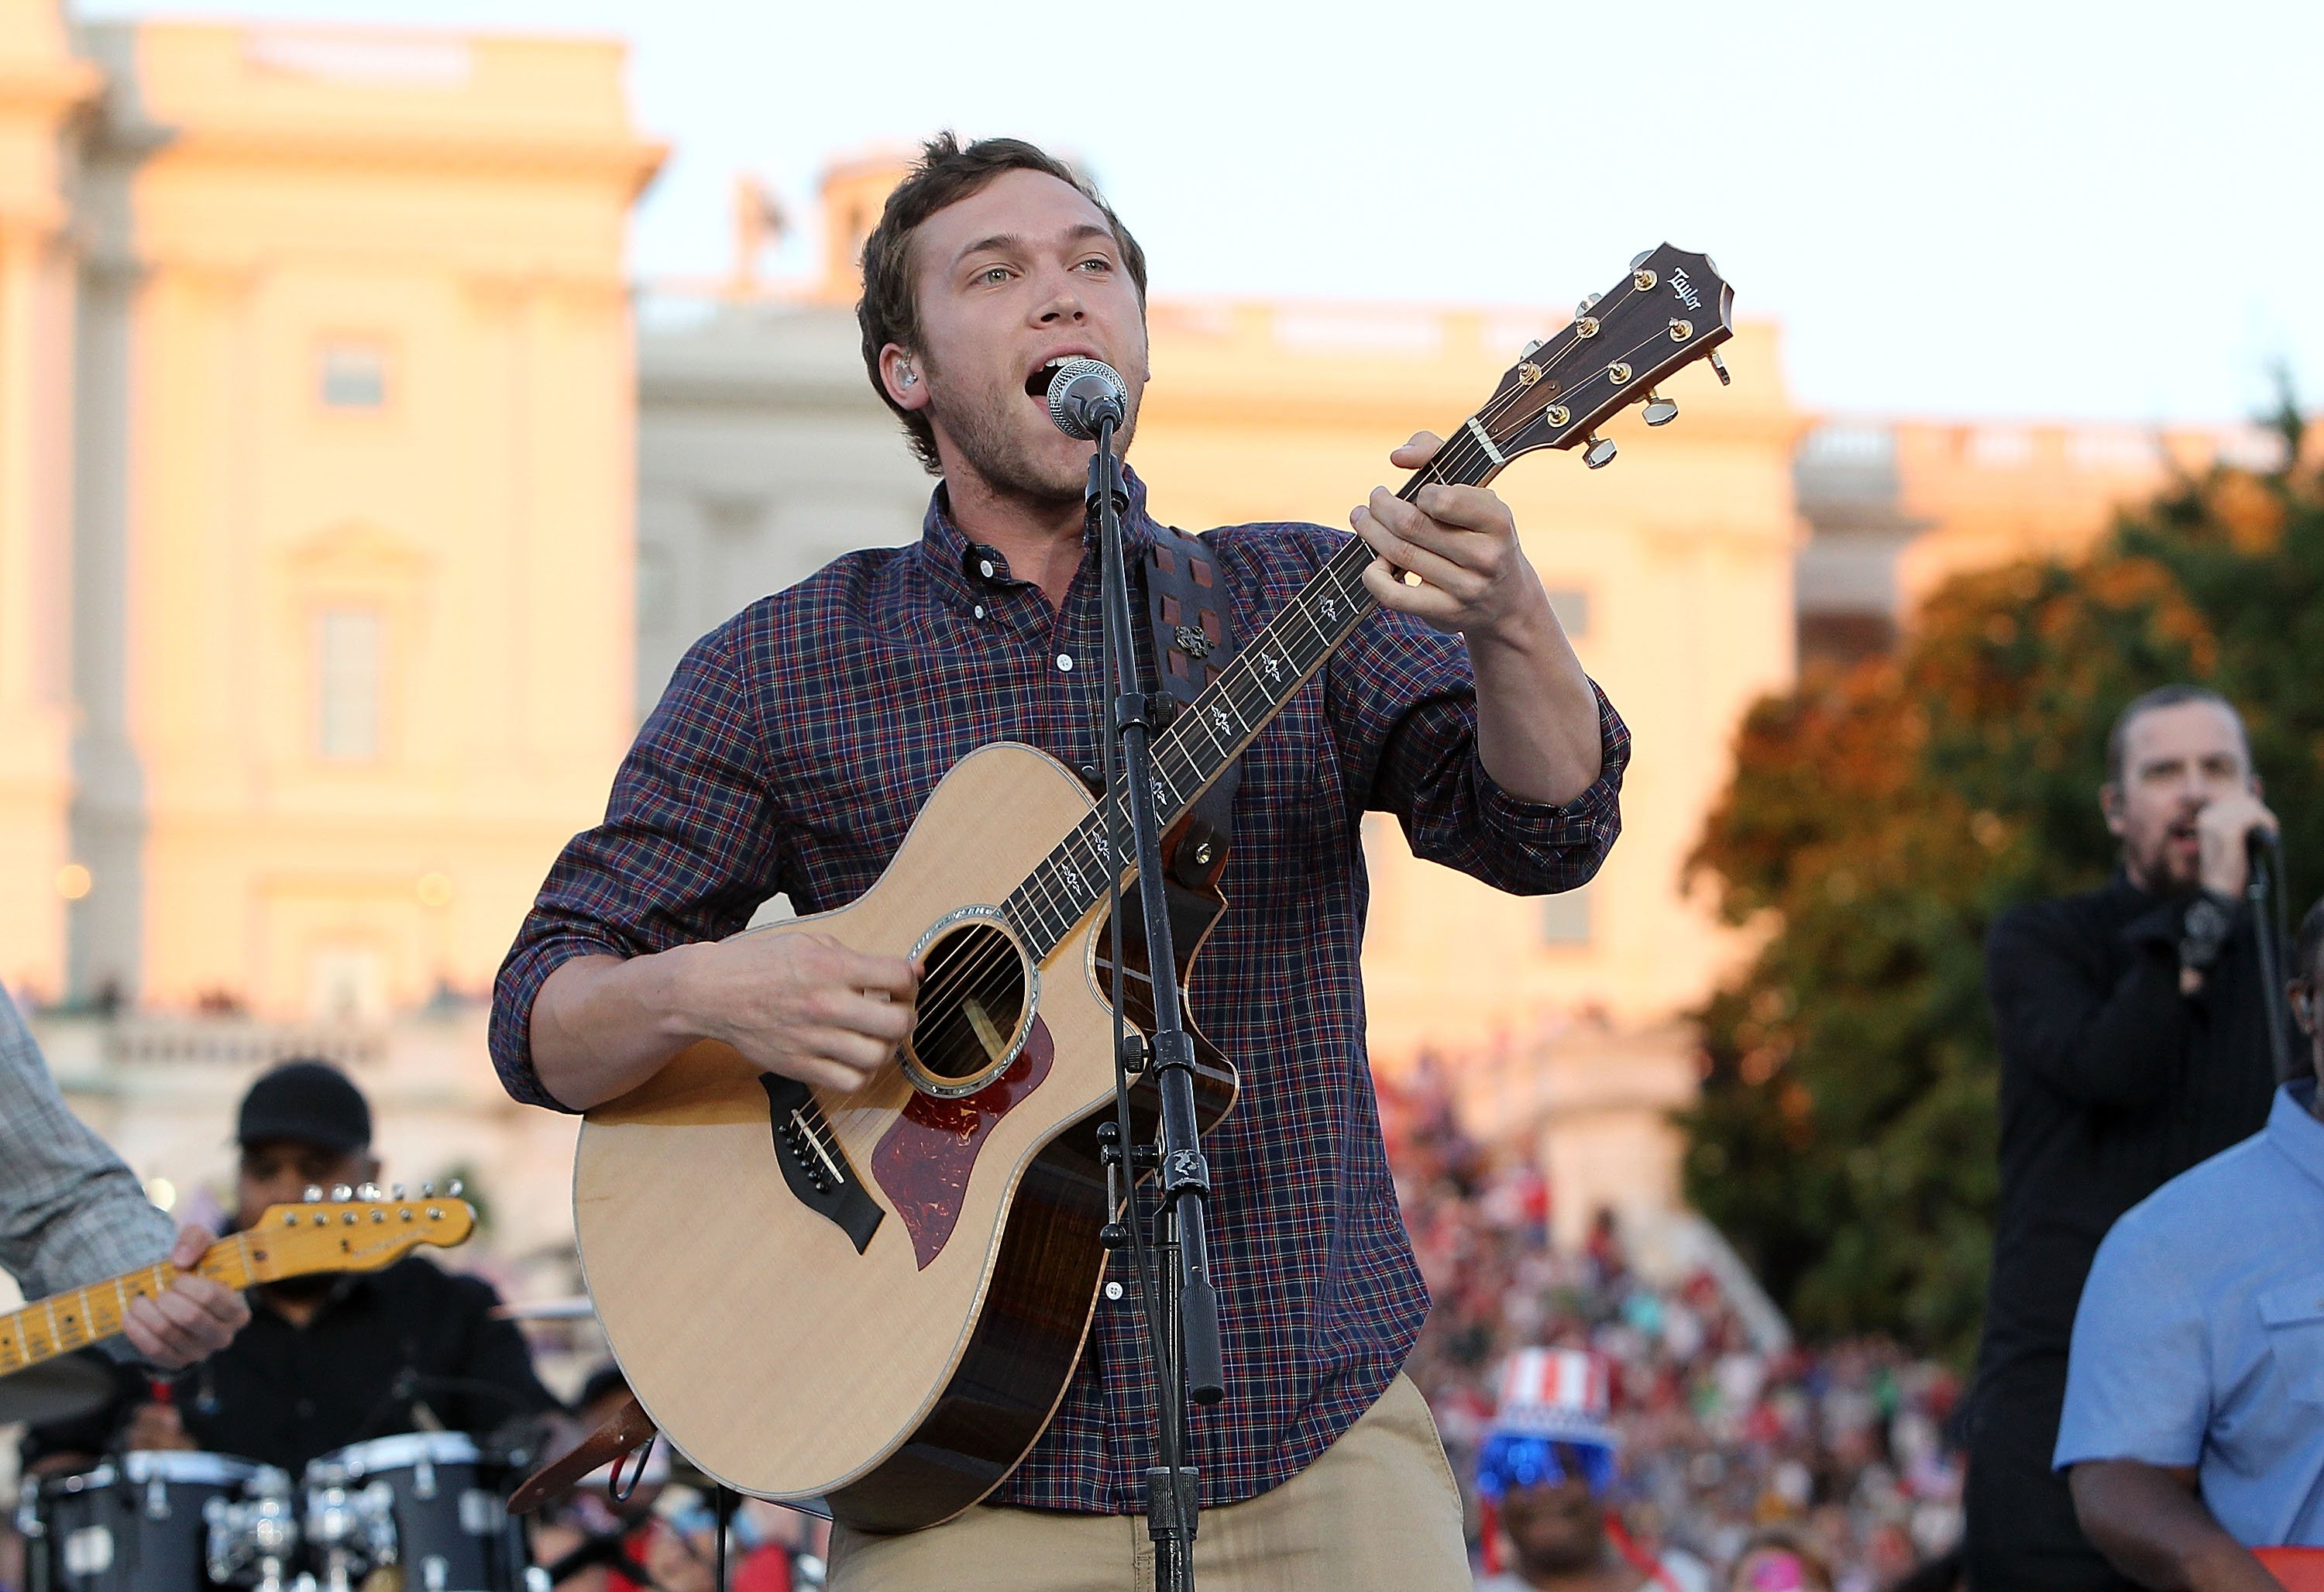 Winner On 'American Idol' Phillip Phillips' Family Selling Their Pawn Shop | Celebrity ...3000 x 2055